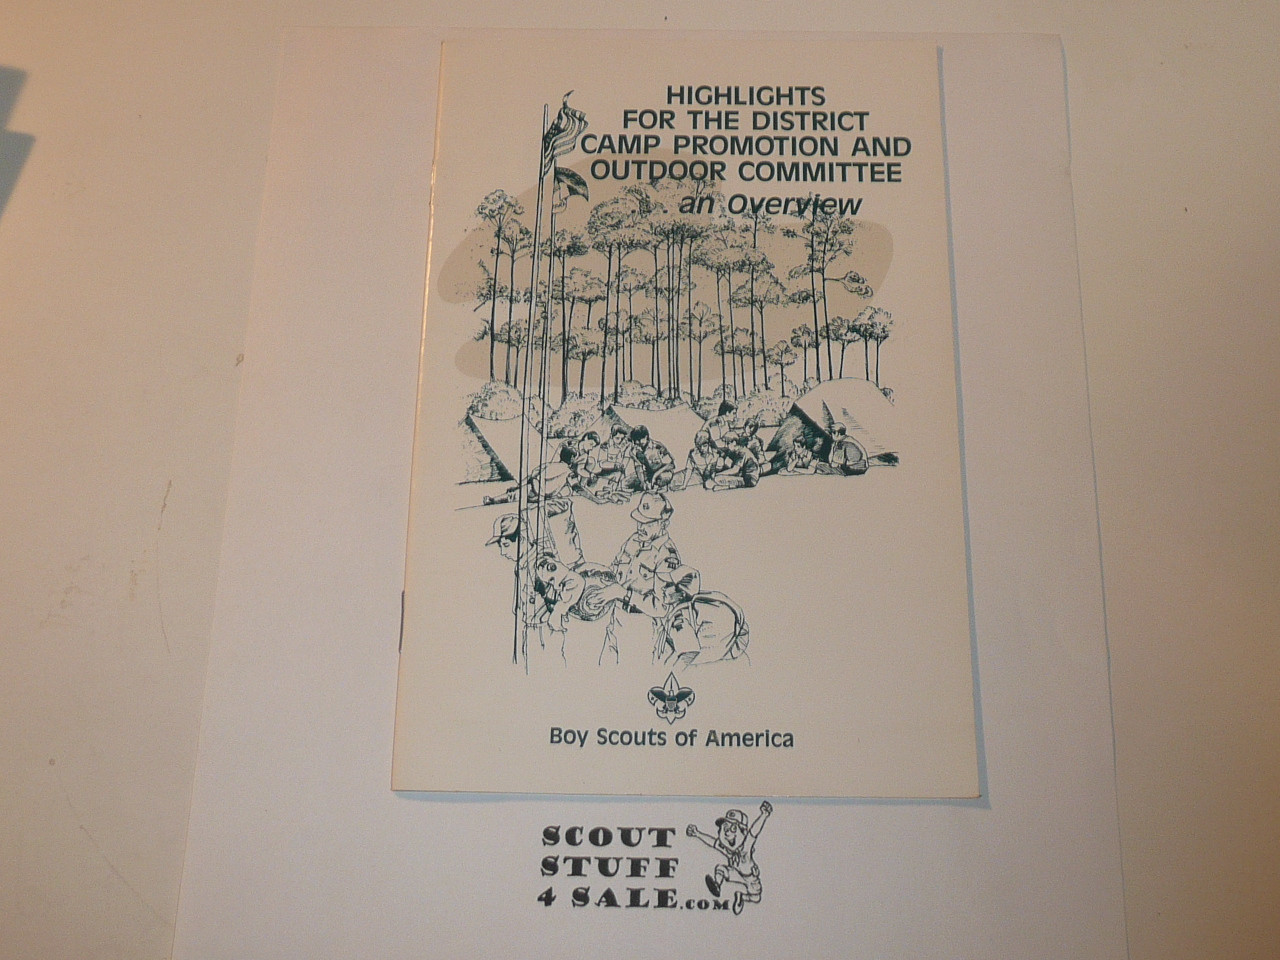 1989 Highlights for the District Camp Promotion and Outdoor Committee...an Overview